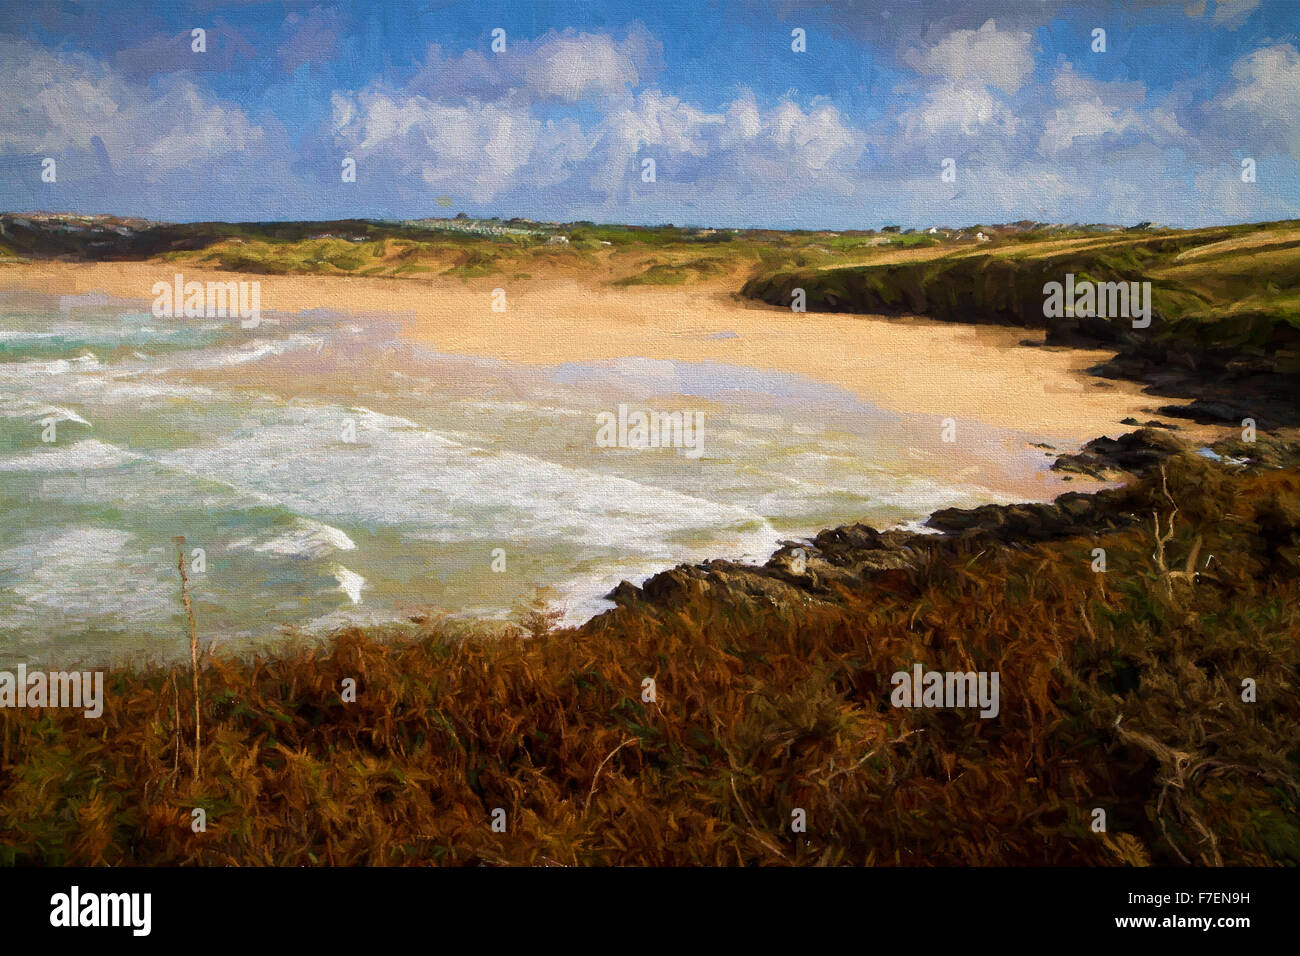 Crantock bay and beach North Cornwall England UK near Newquay with waves and clouds in autumn illustration like oil painting Stock Photo